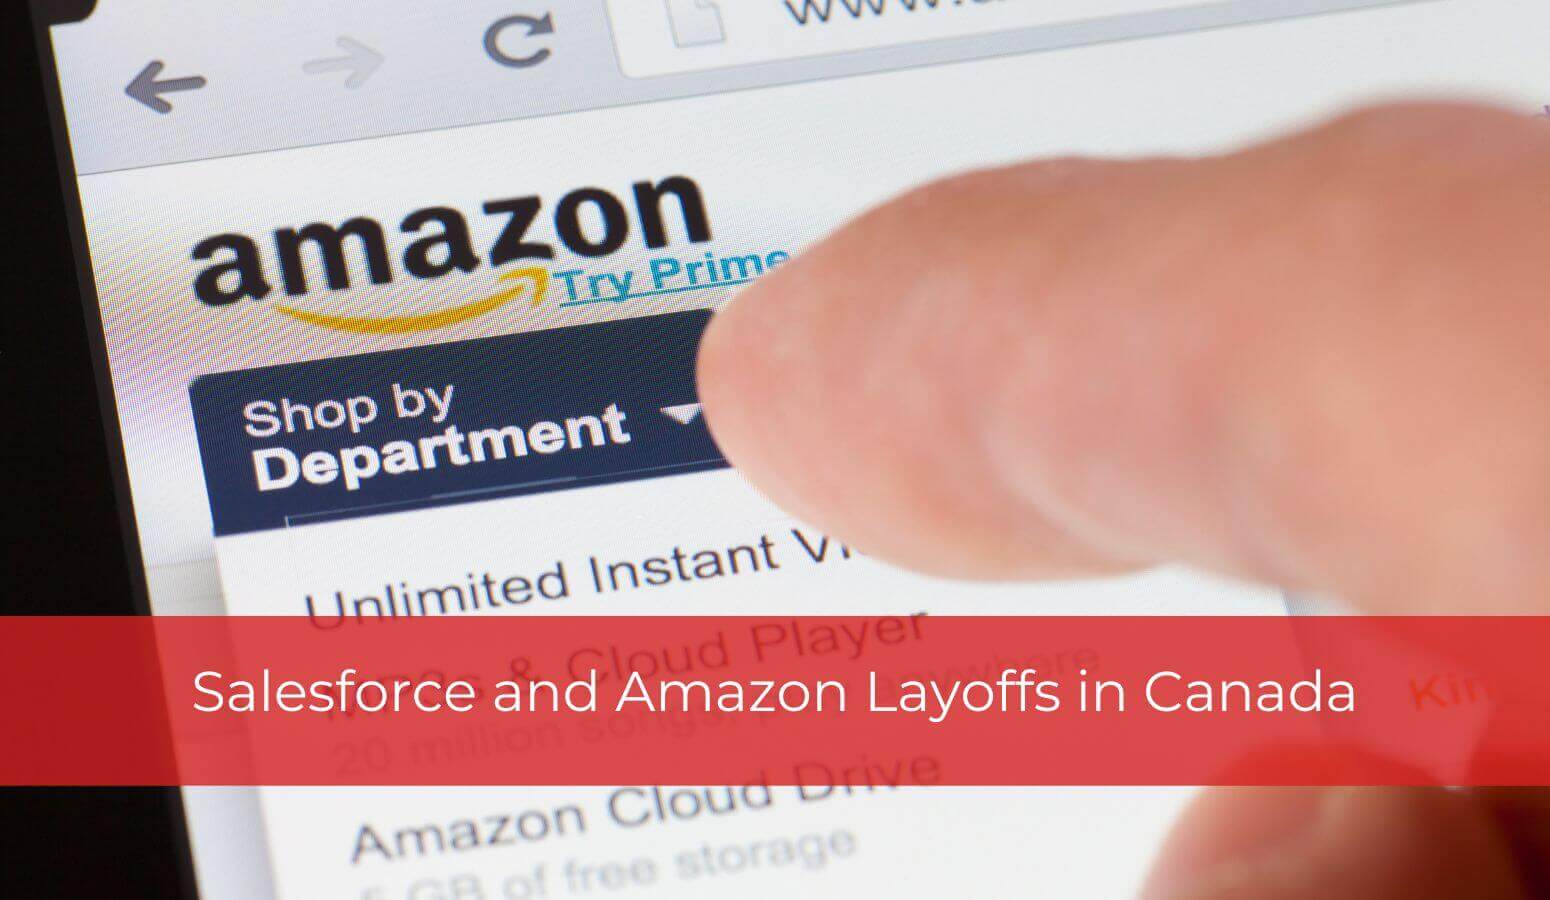 Featured image for “Salesforce and Amazon Layoffs in Canada”